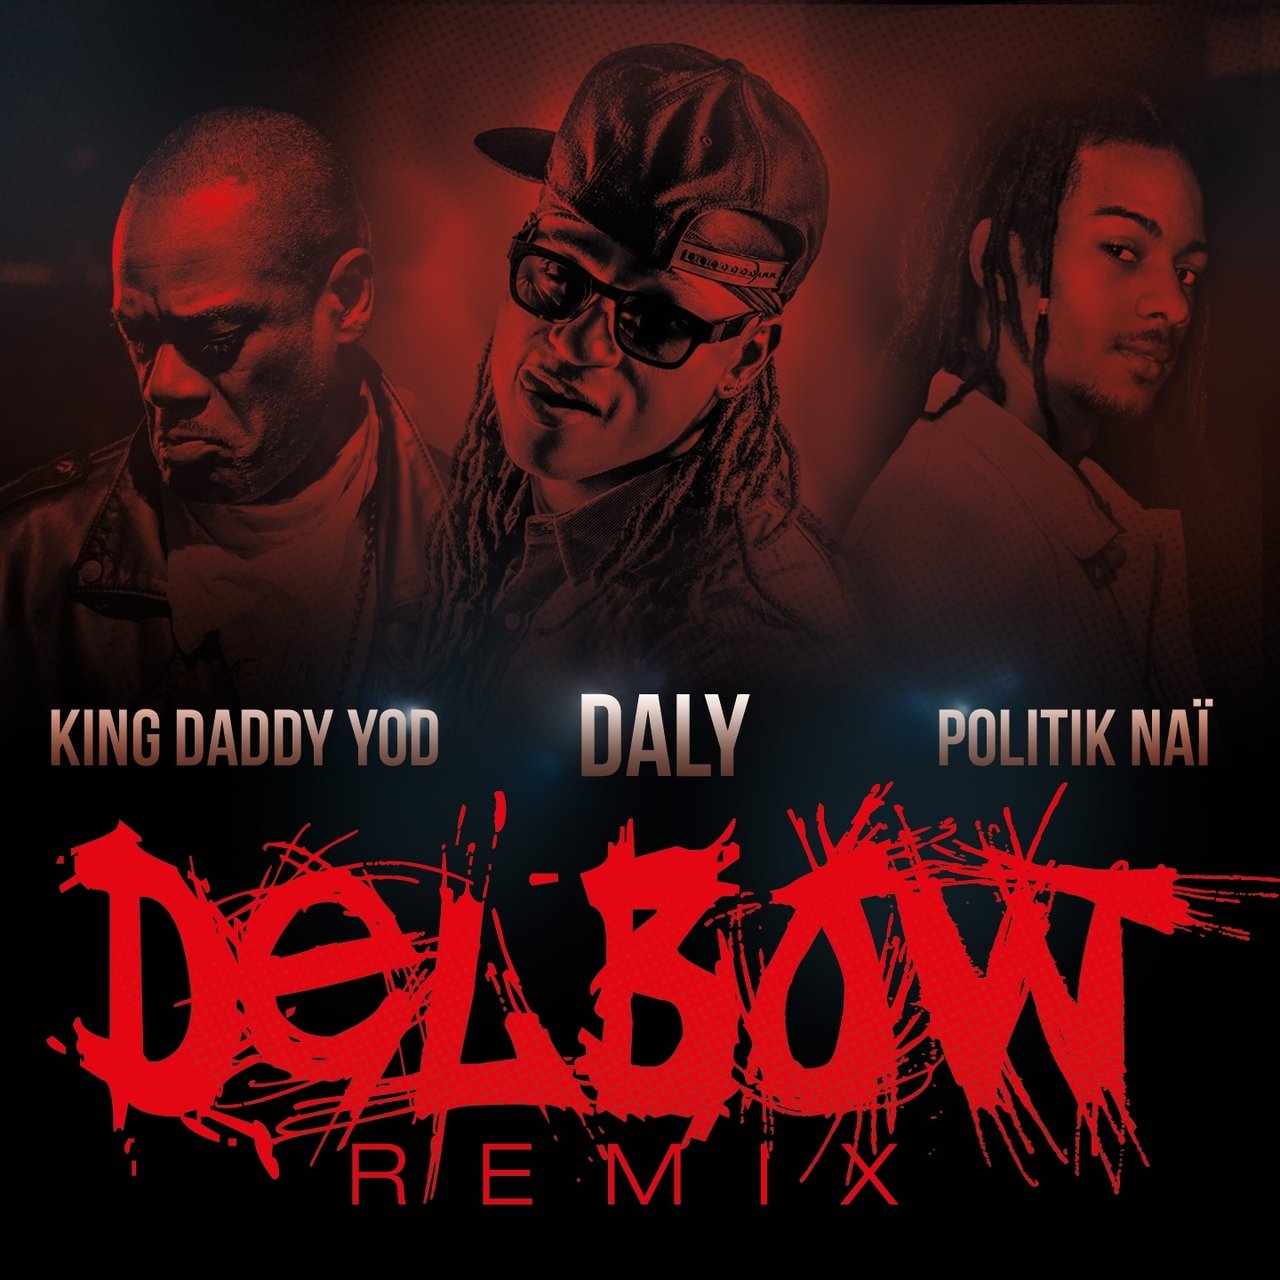 Daly - Delbow (Remix) (ft. King Daddy Yod and Politik Naï) (Cover)